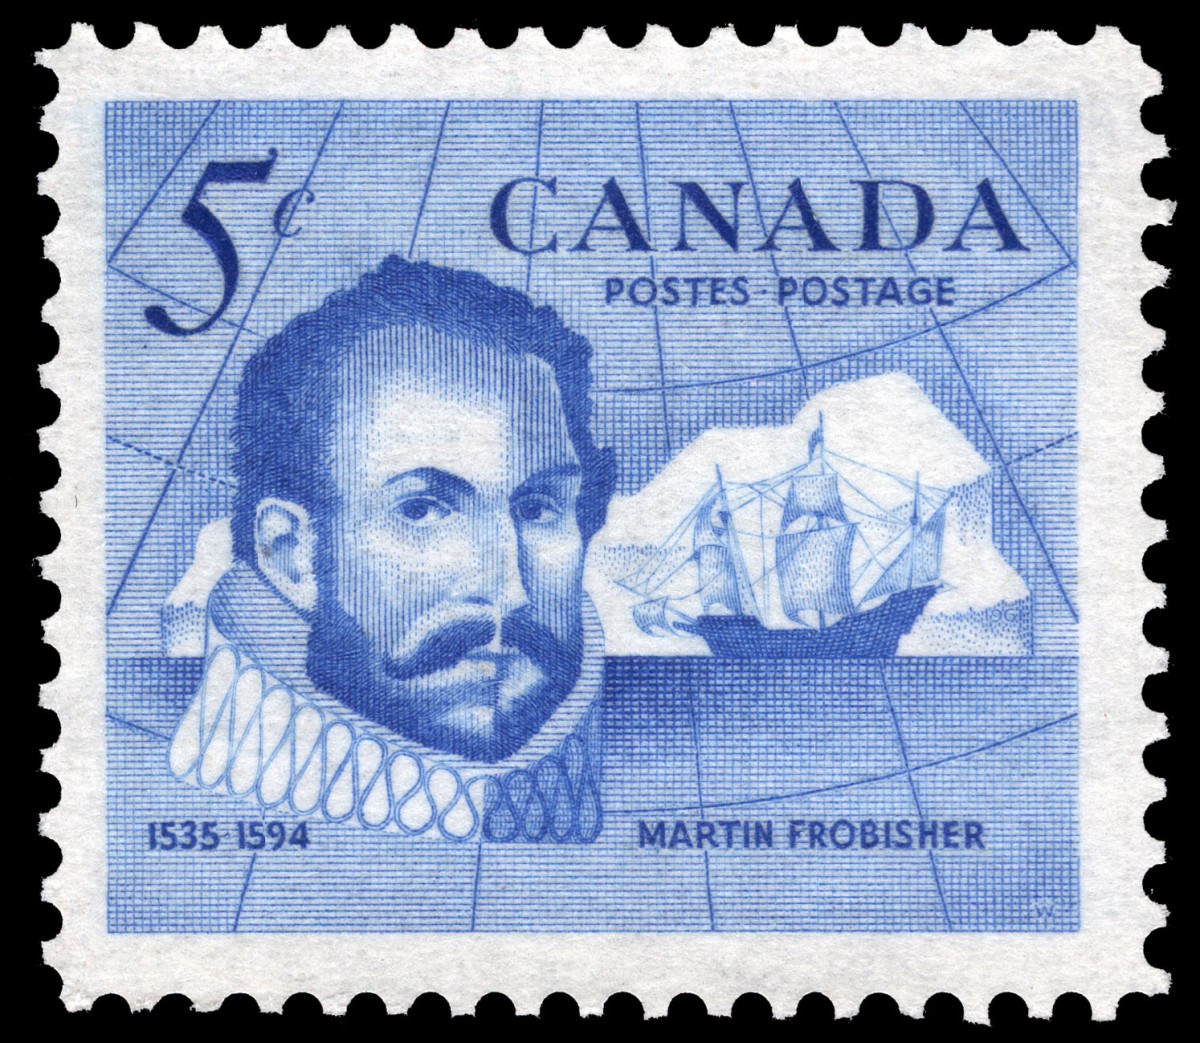 Precolonial North American History: Third Arctic voyage of Martin Frobisher